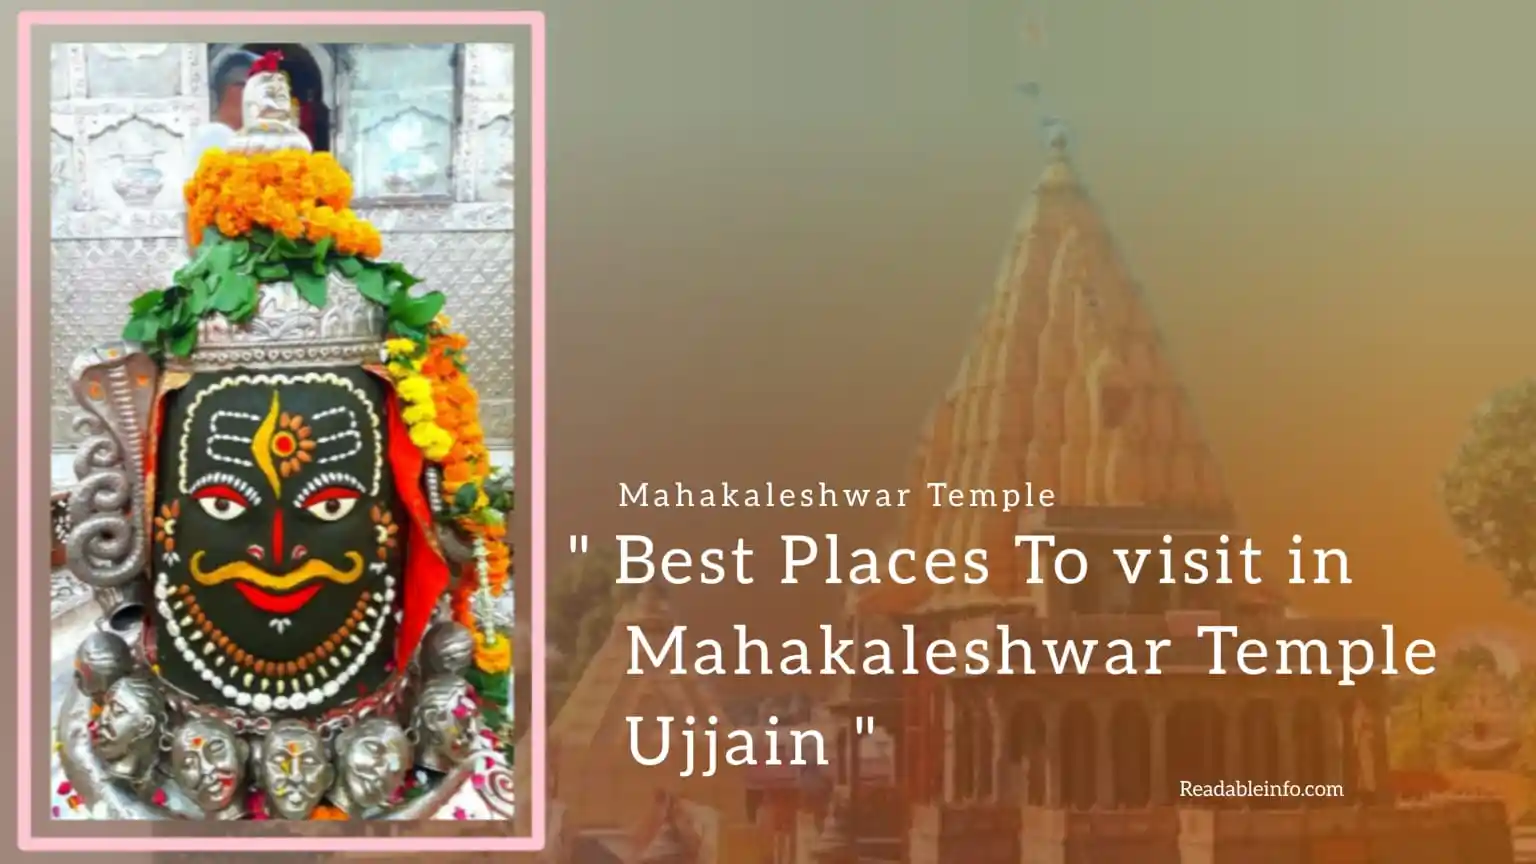 You are currently viewing Best places to visit in Mahakaleshwar Temple Ujjain (Mahakaleshwar Temple)